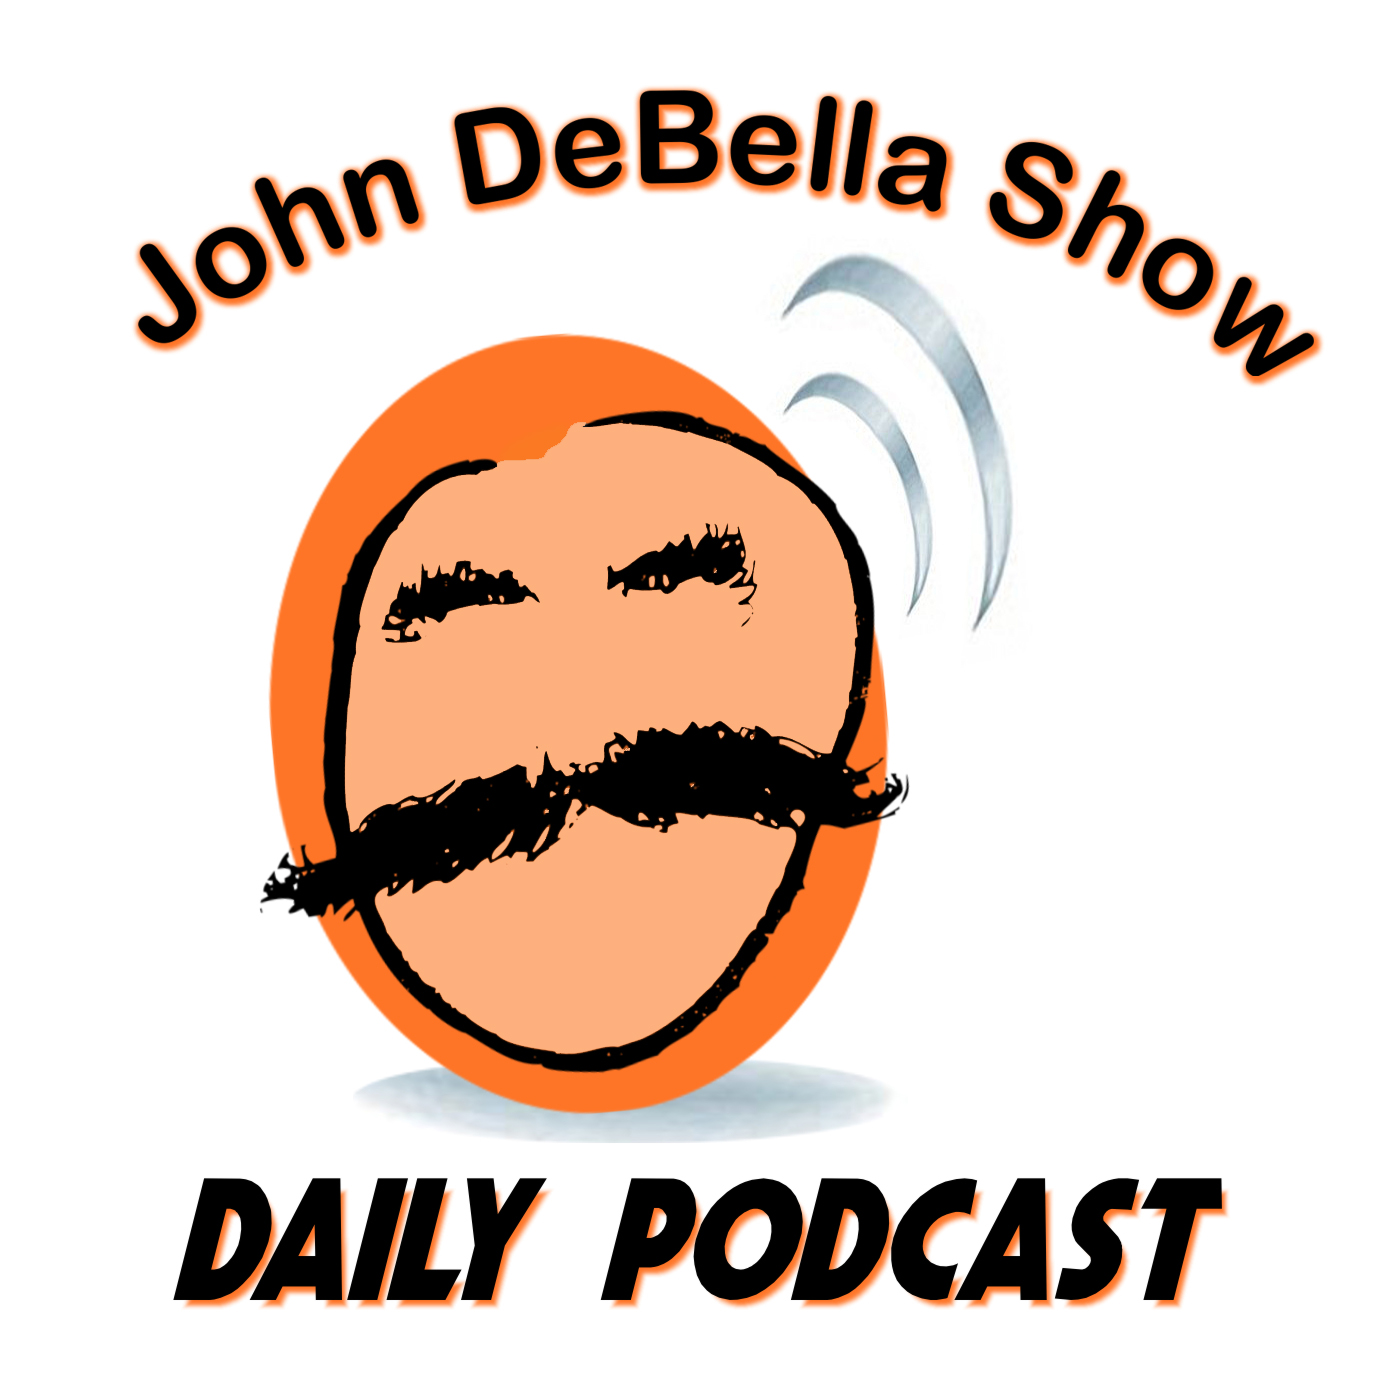 The Daily Podcast (06/21/21)